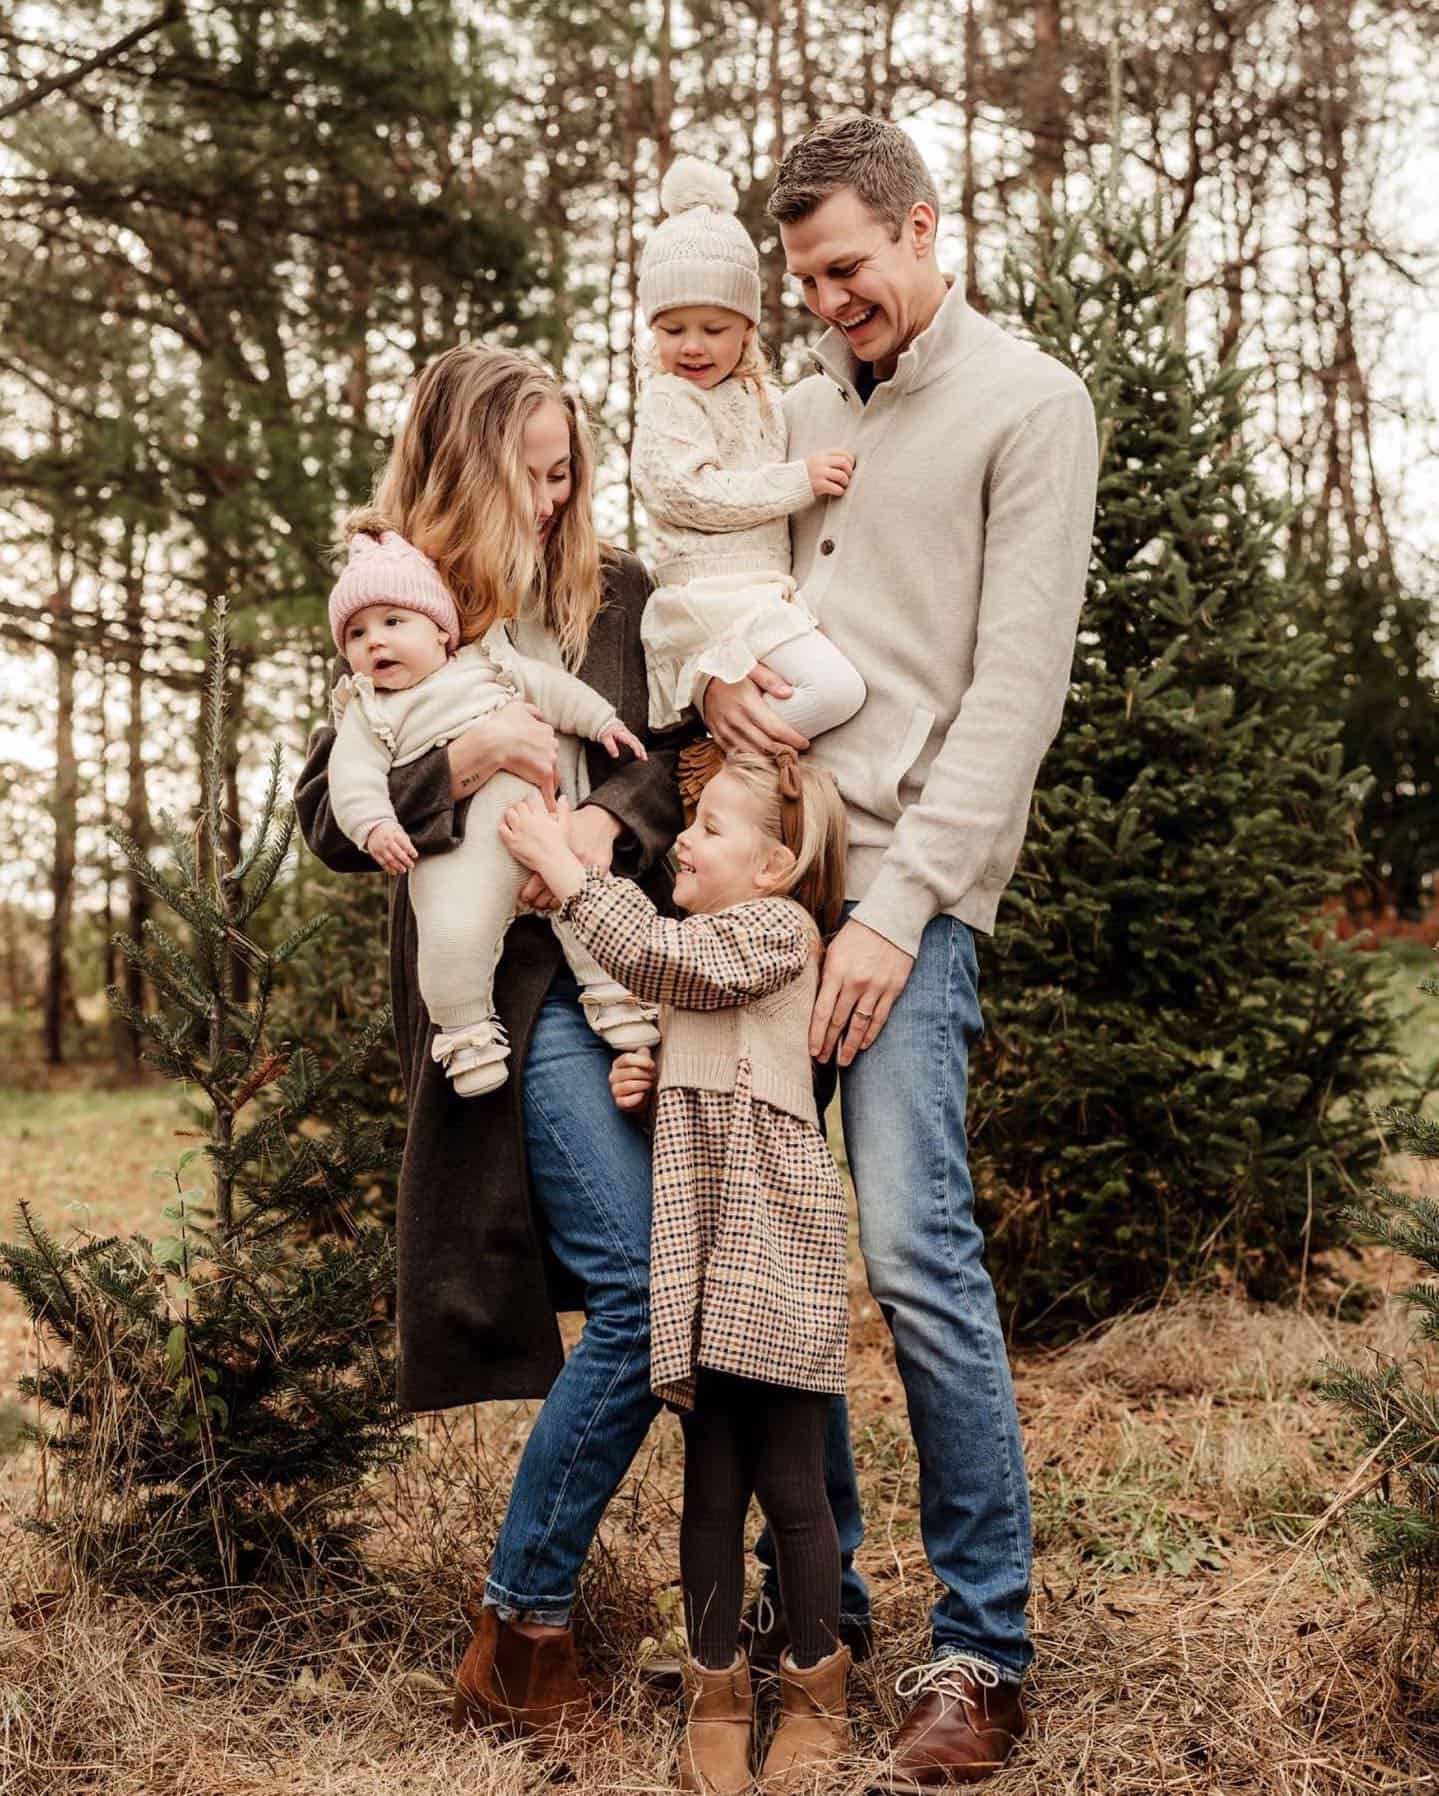 A winter family photoshoot with a family of five wearing neutral colors like white, brown, and beige with pops of denim blue